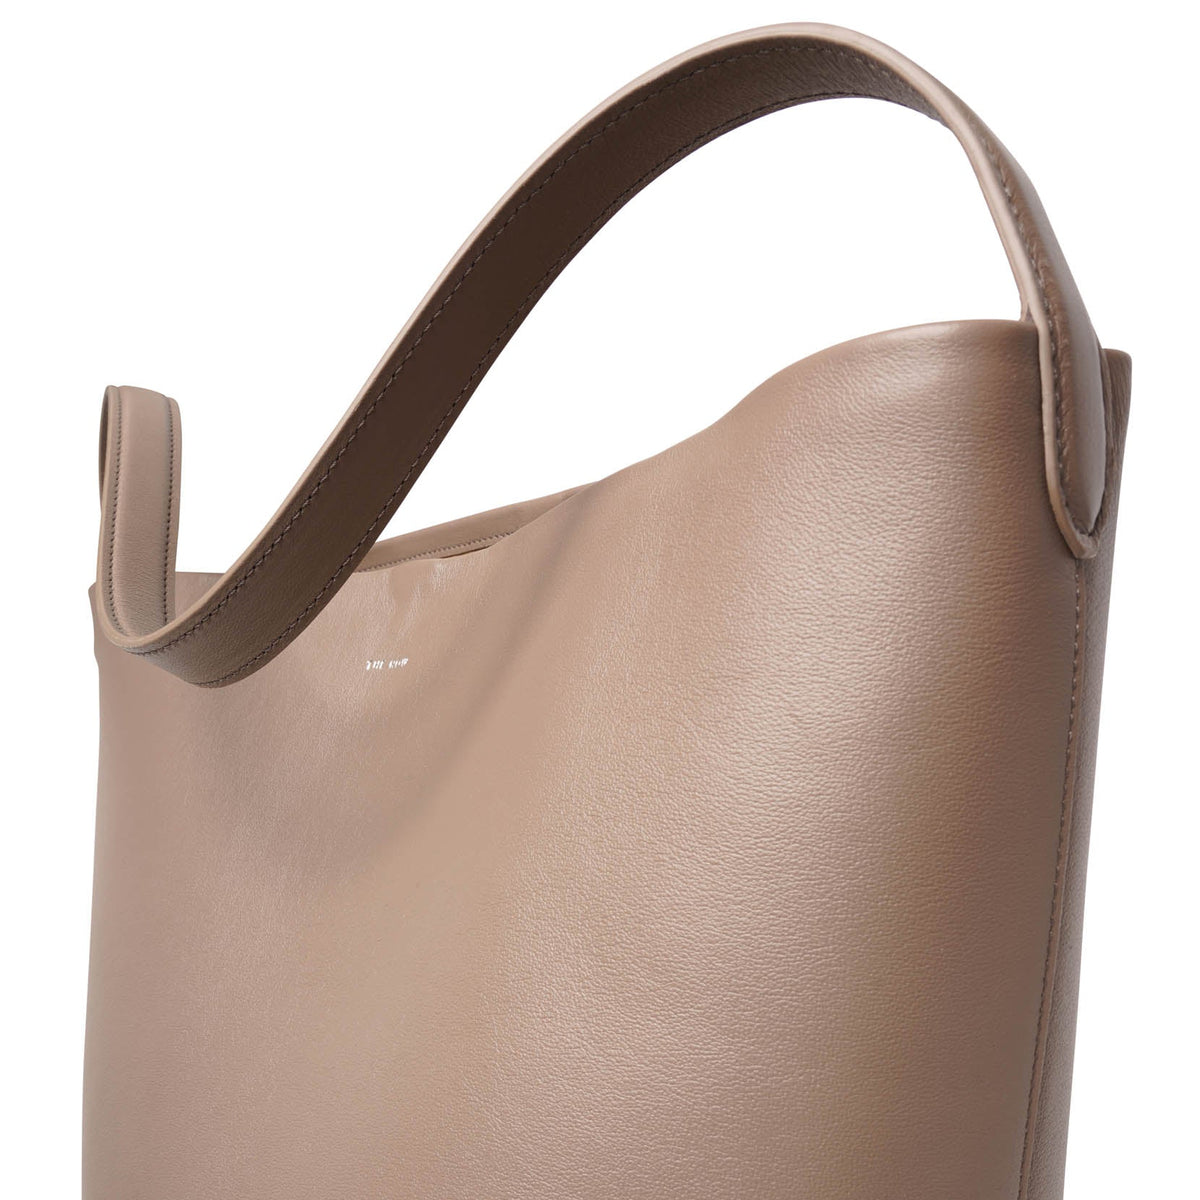 THE ROW N/S Park Large leather tote